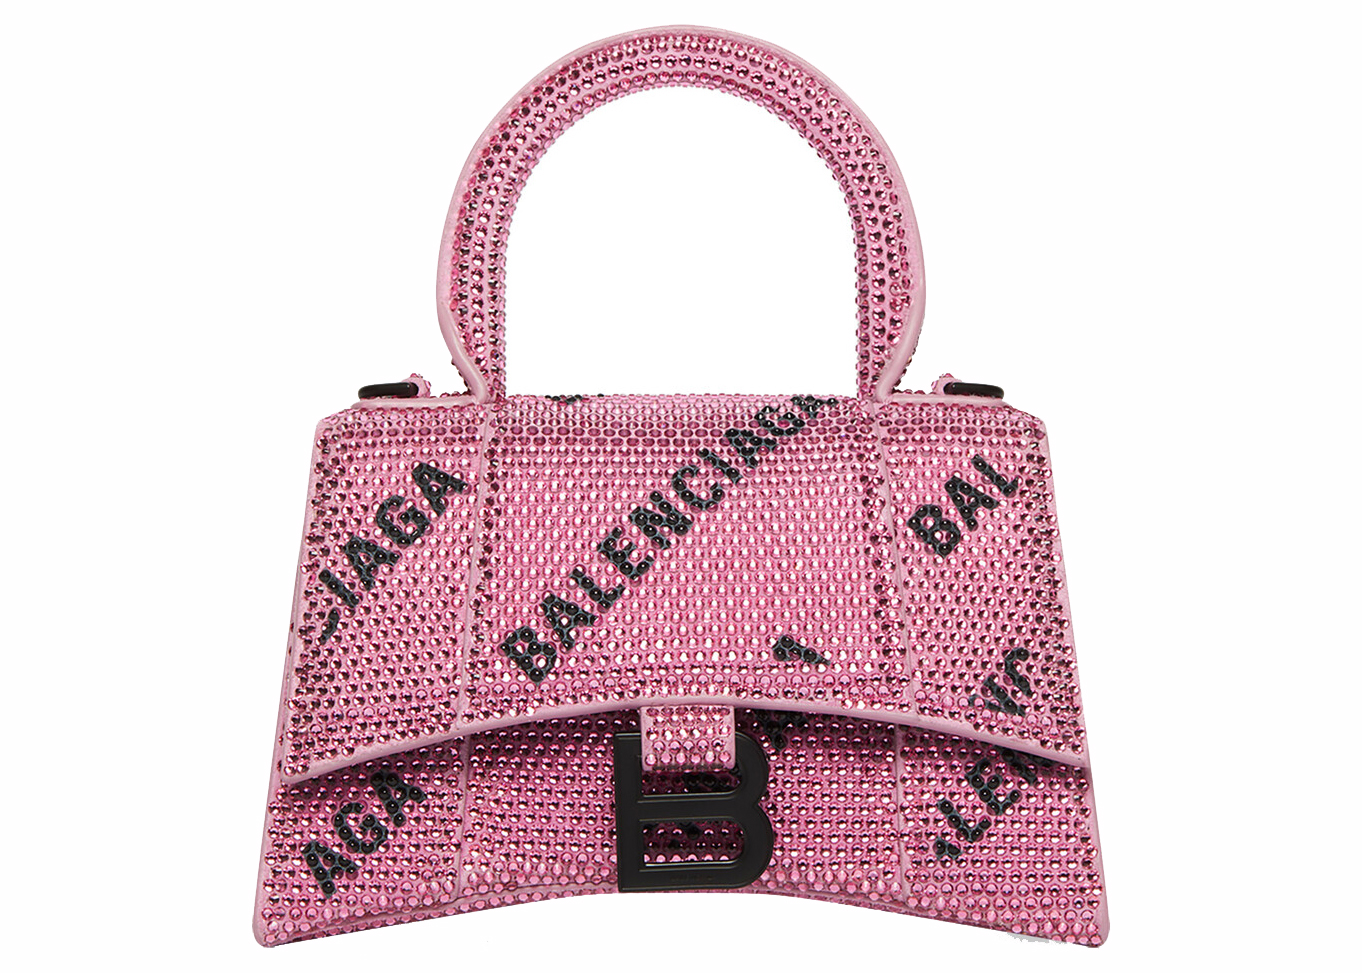 Balenciaga Hourglass XS Handbag With Chain and Allover Logo Rhinestones Pink/Black  in Suede Calfskin/Crystals with Matte Black Hardware - US